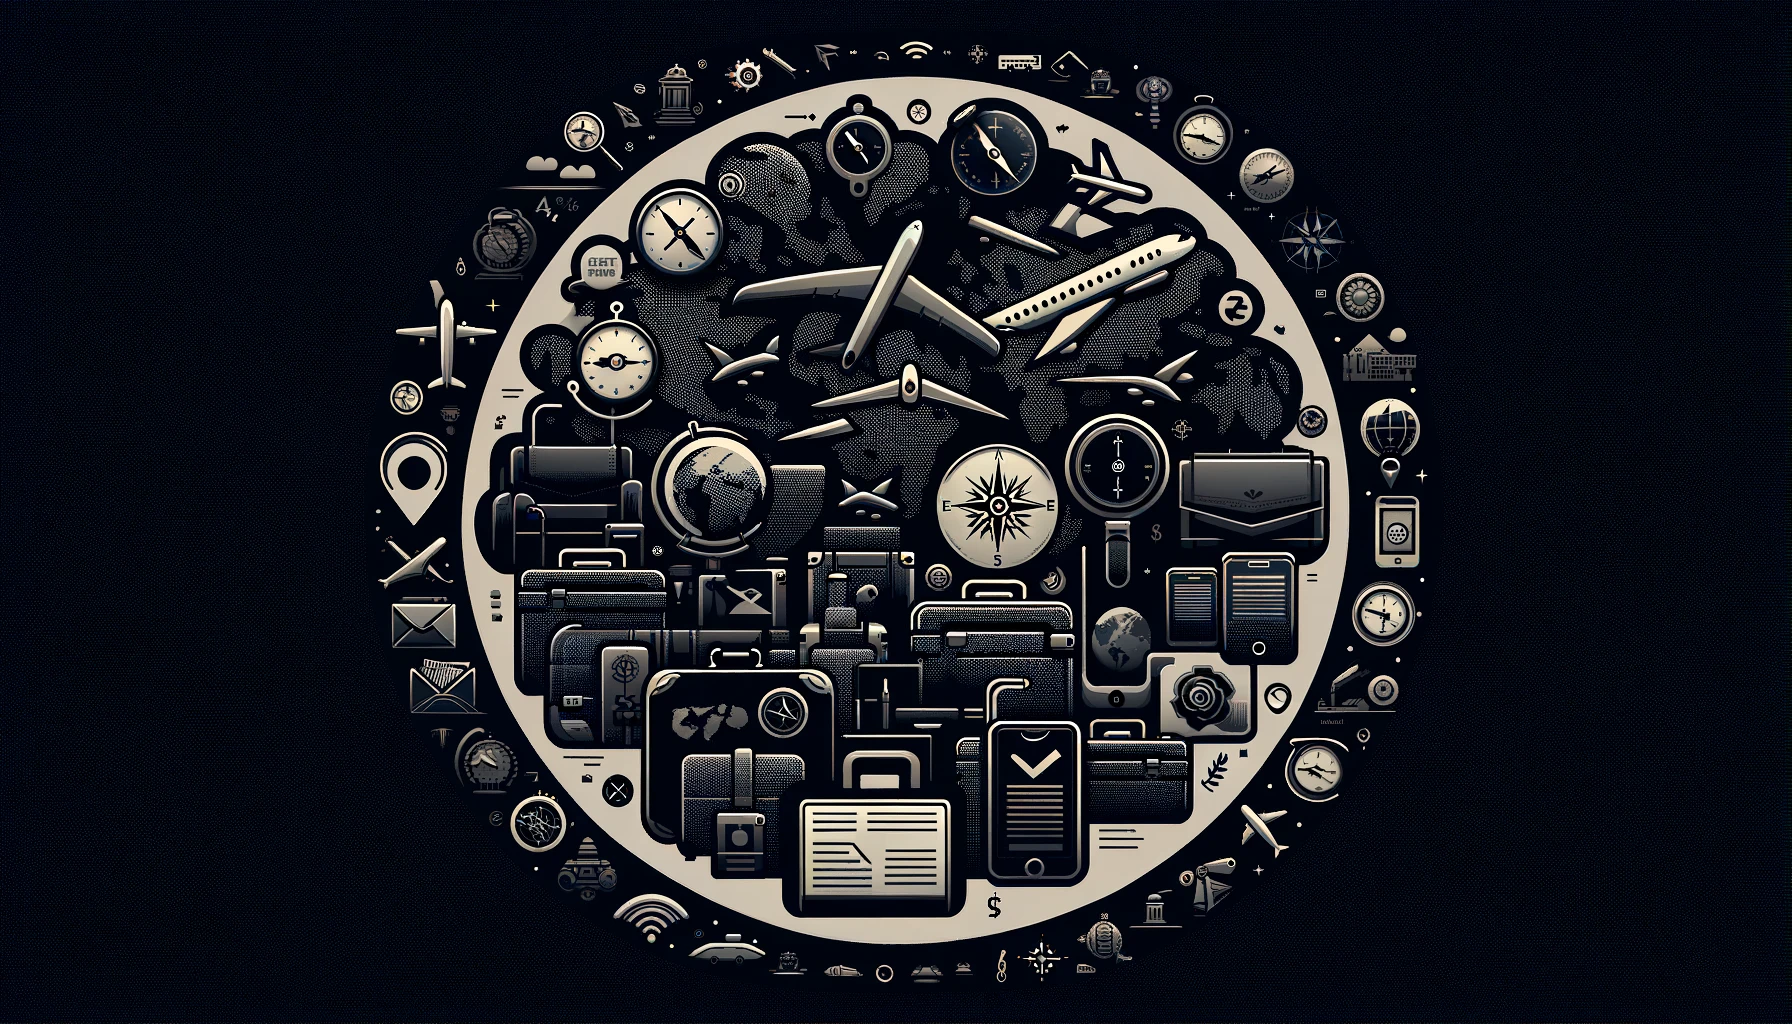 A dark-themed 16 9 background image suitable for a travel agency website, illustrating the concept of service offerings without depicting any people.